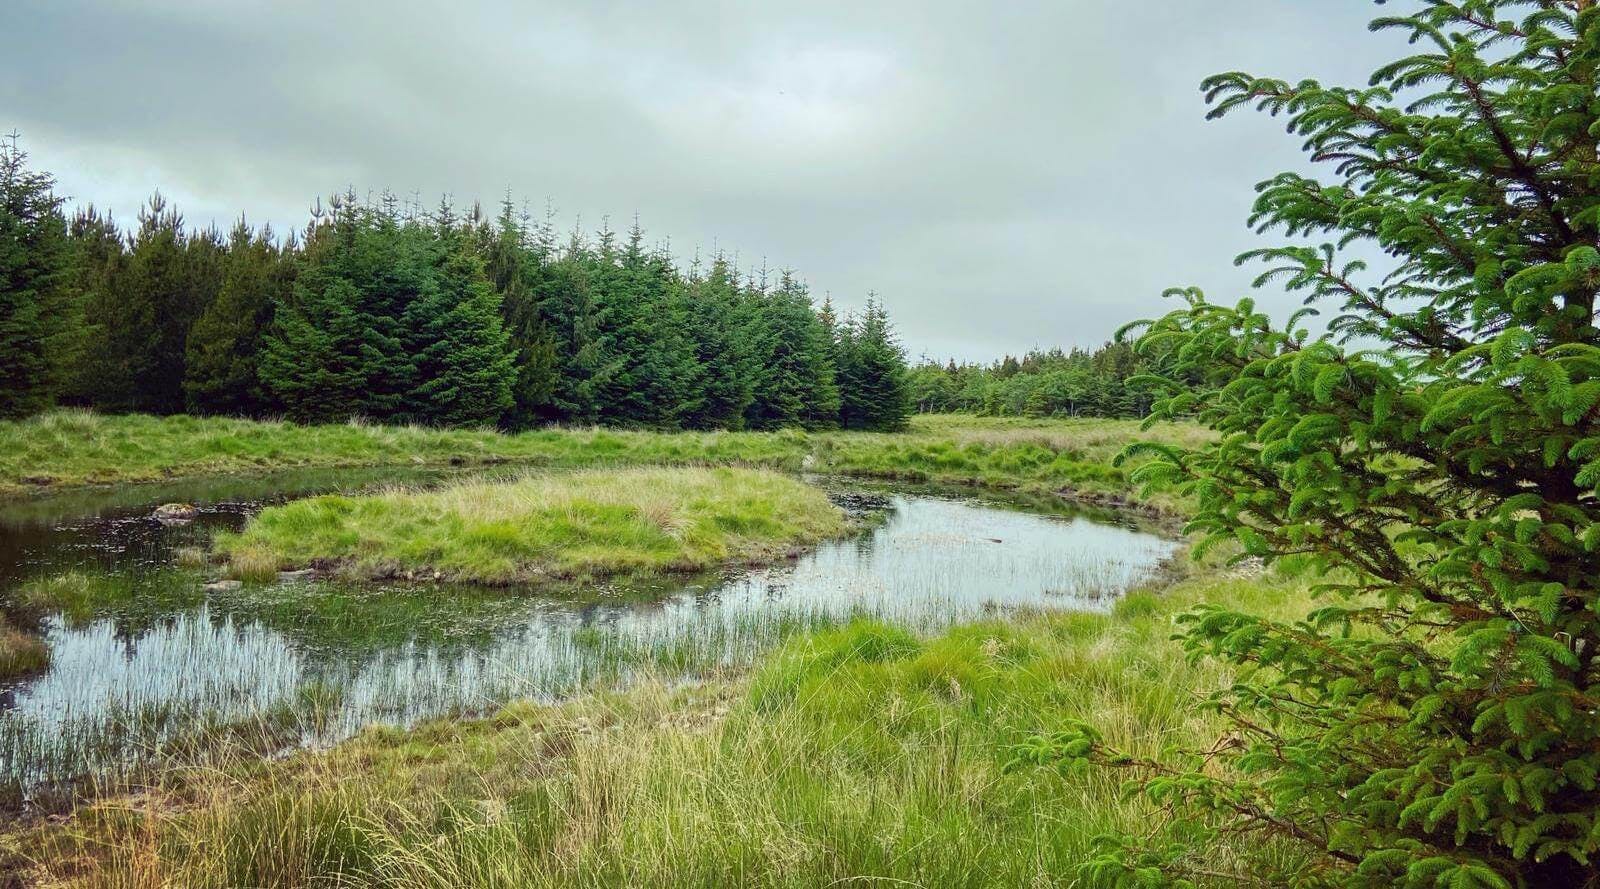 Ackron Mixed afforestation project in Scotland